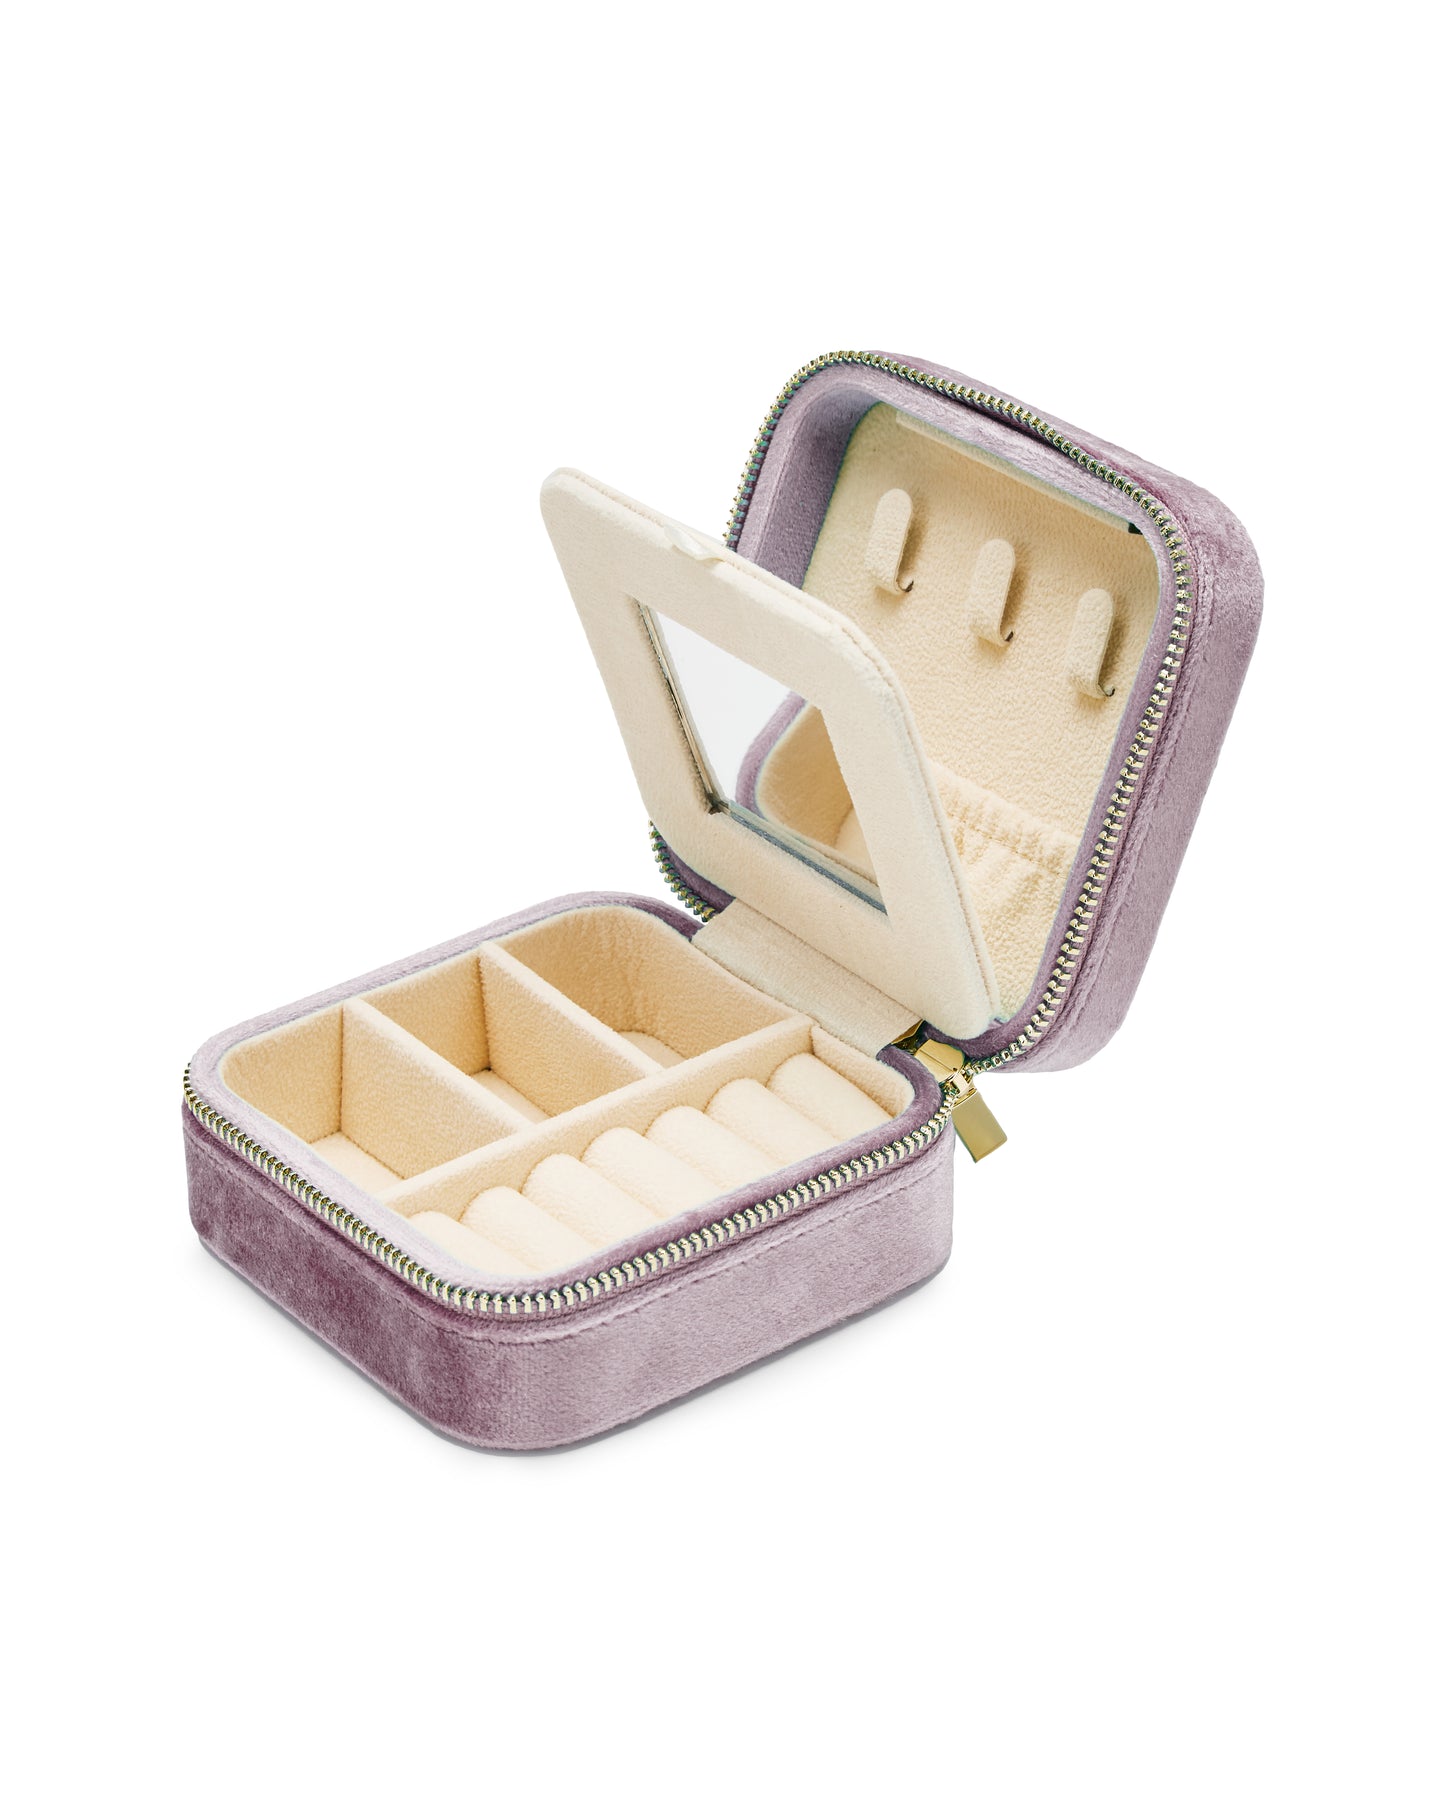 VELVET JEWELRY BOX col. metallic lilac, directly orderable - 5 pieces